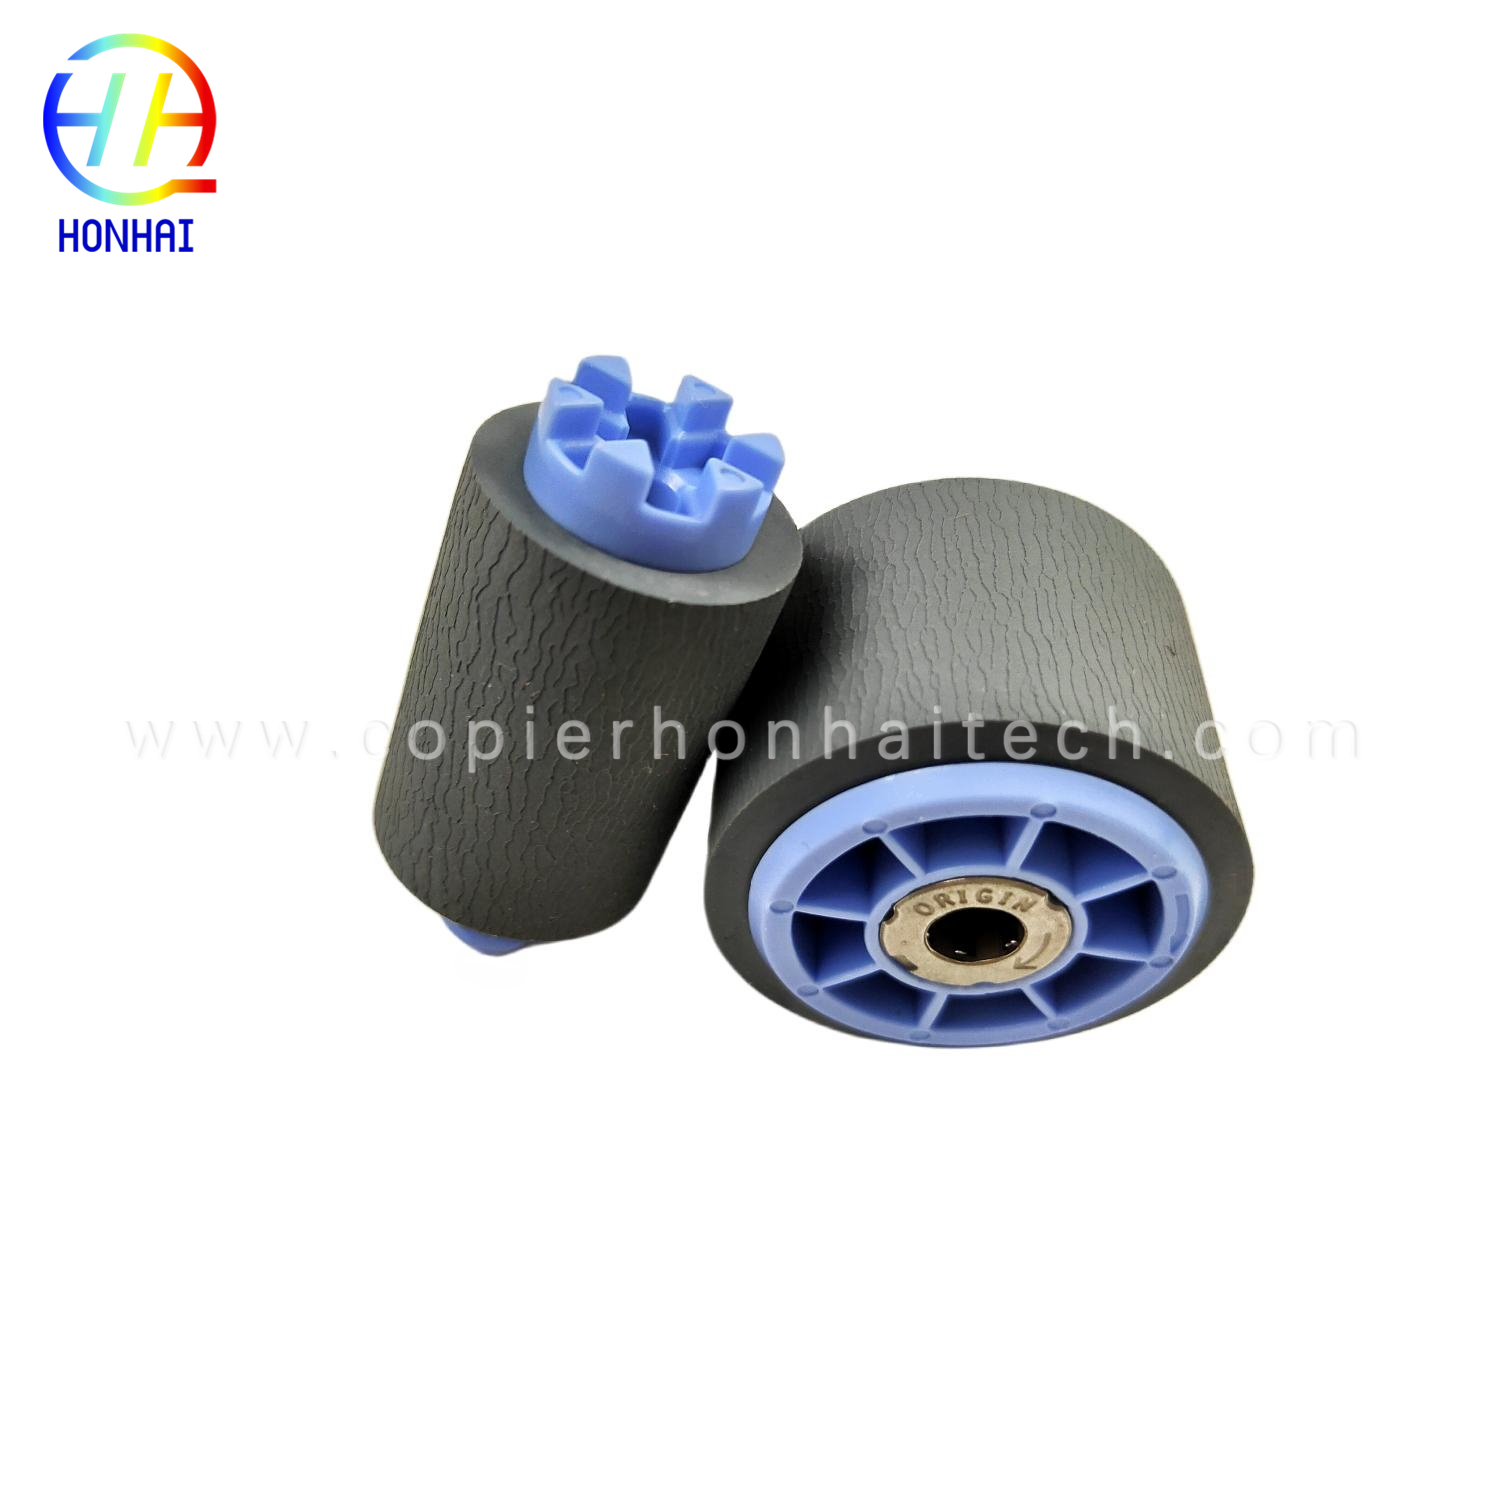 https://www.copierhonhaitech.com/copy-tray-2-5-picup-feed-separation-roller-set-for-hp-a7w93-67082-mfp-785f-780dn-e77650z-e77660z-e7767760dn p77740dn-p77750z-p77760z-p75050dn-p75050dw-product/